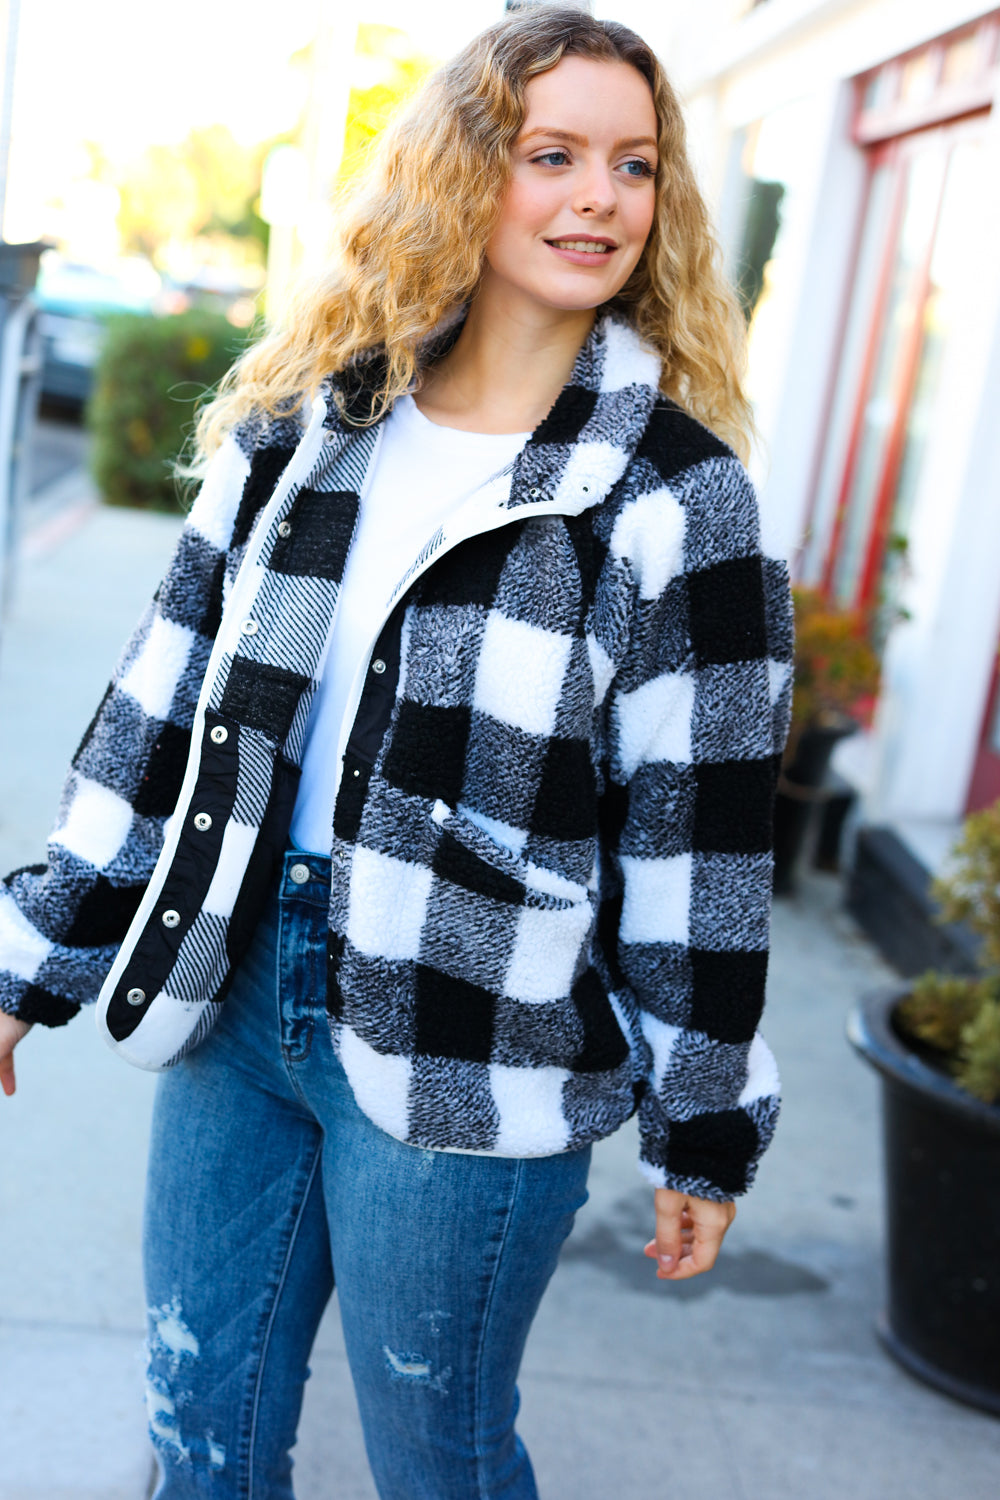 It's Your Best Plaid Sherpa Jacket in Black